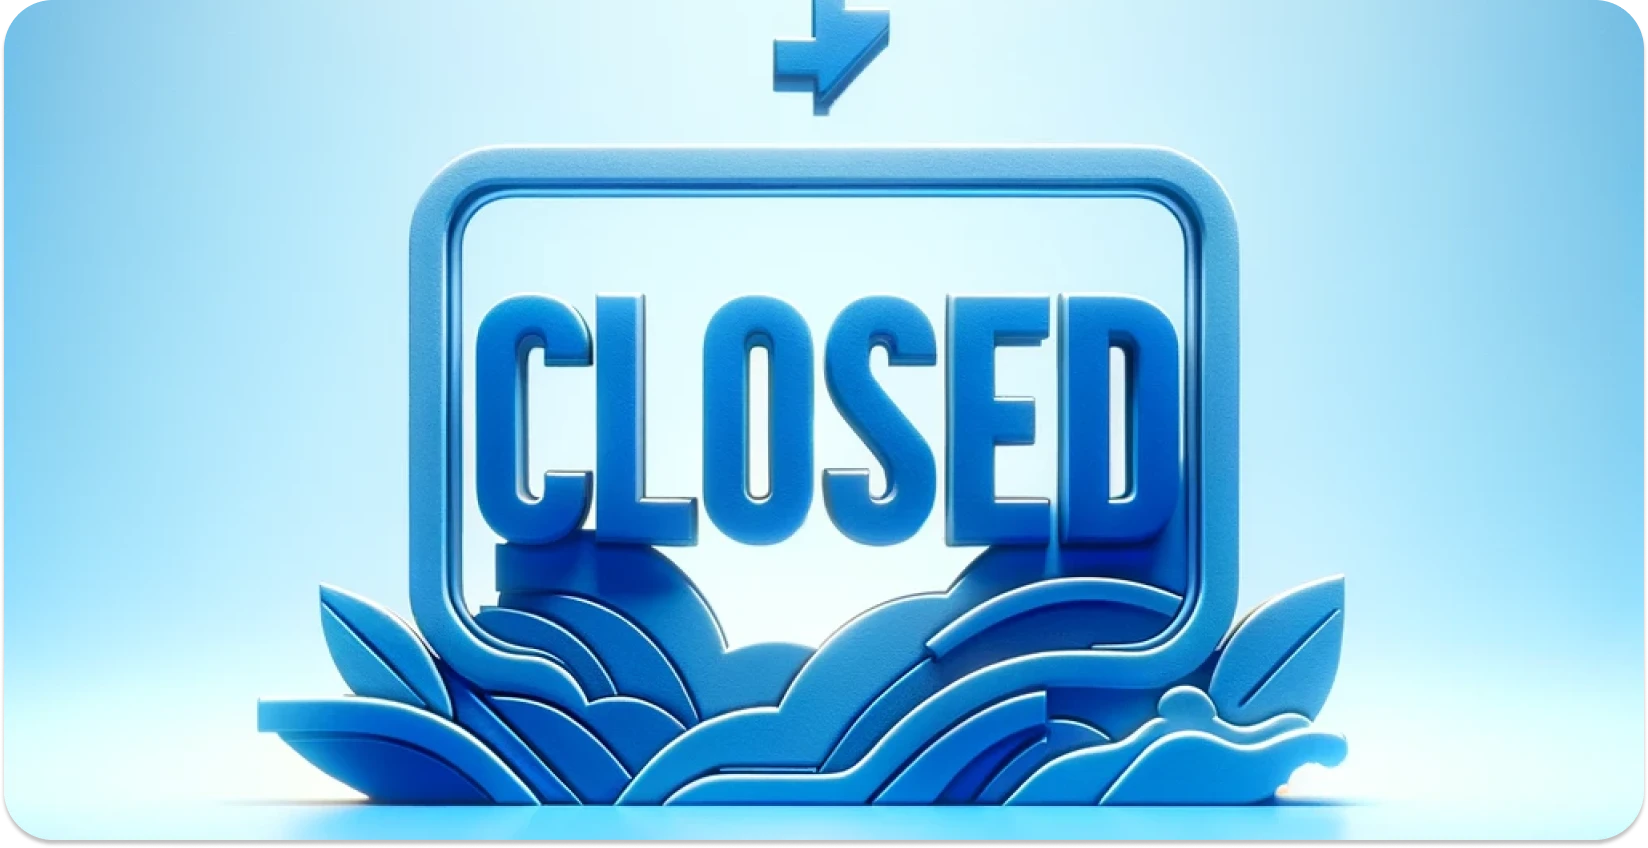 Closed sign floating over a blue backdrop symbolizes closed subtitle type for transcribing spoken content.